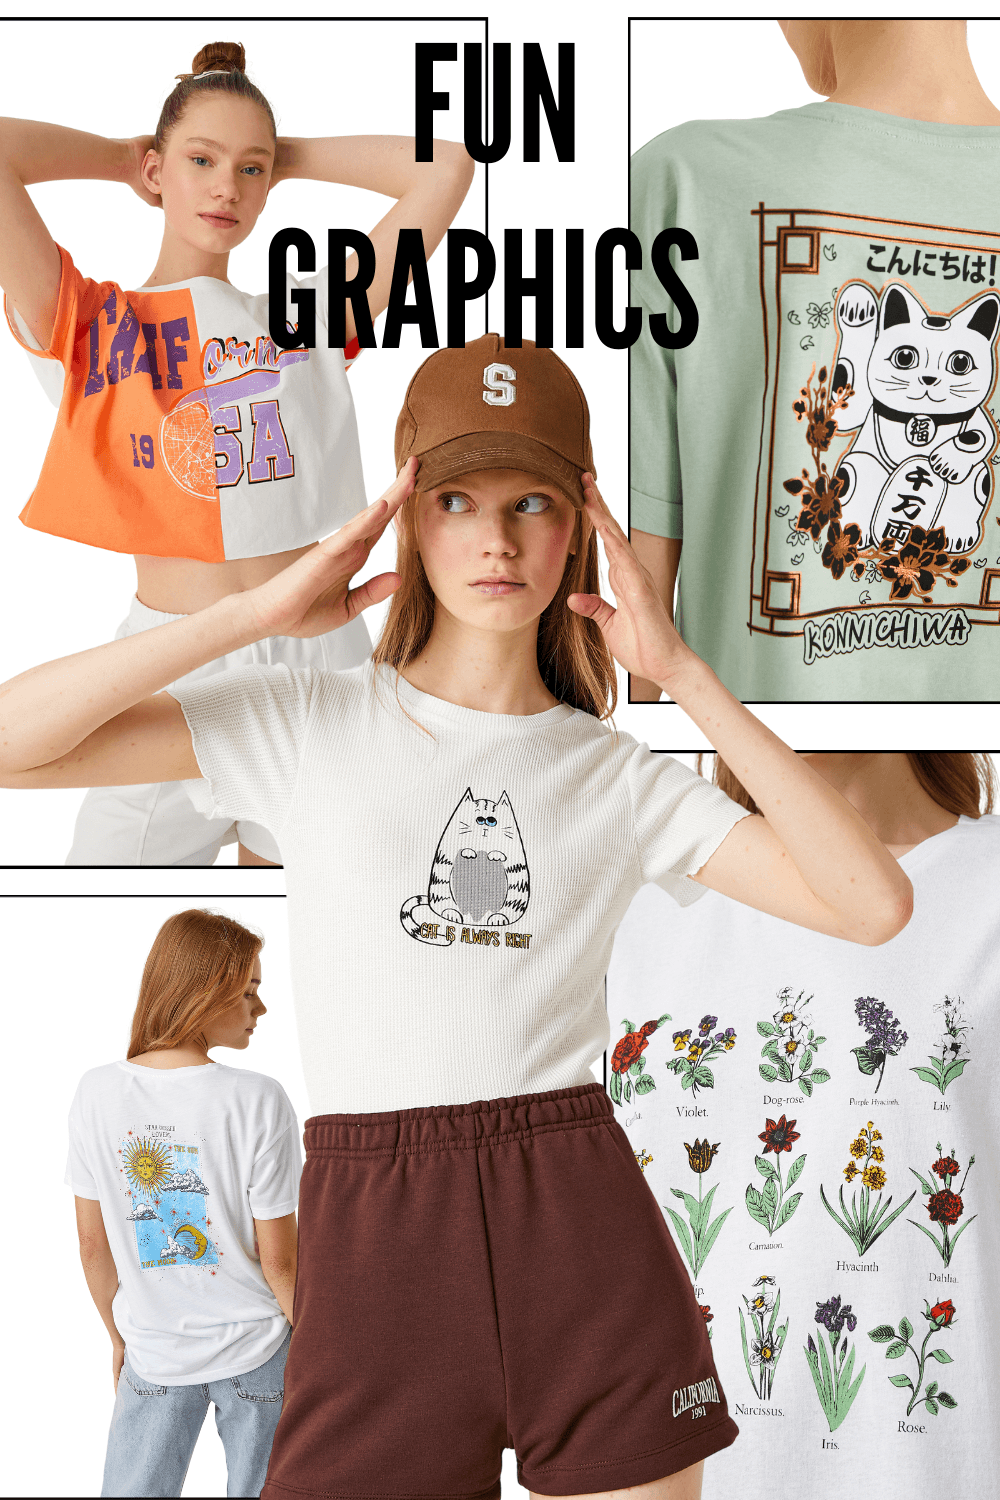 FUN GRAPHICS - Usolo Outfitters